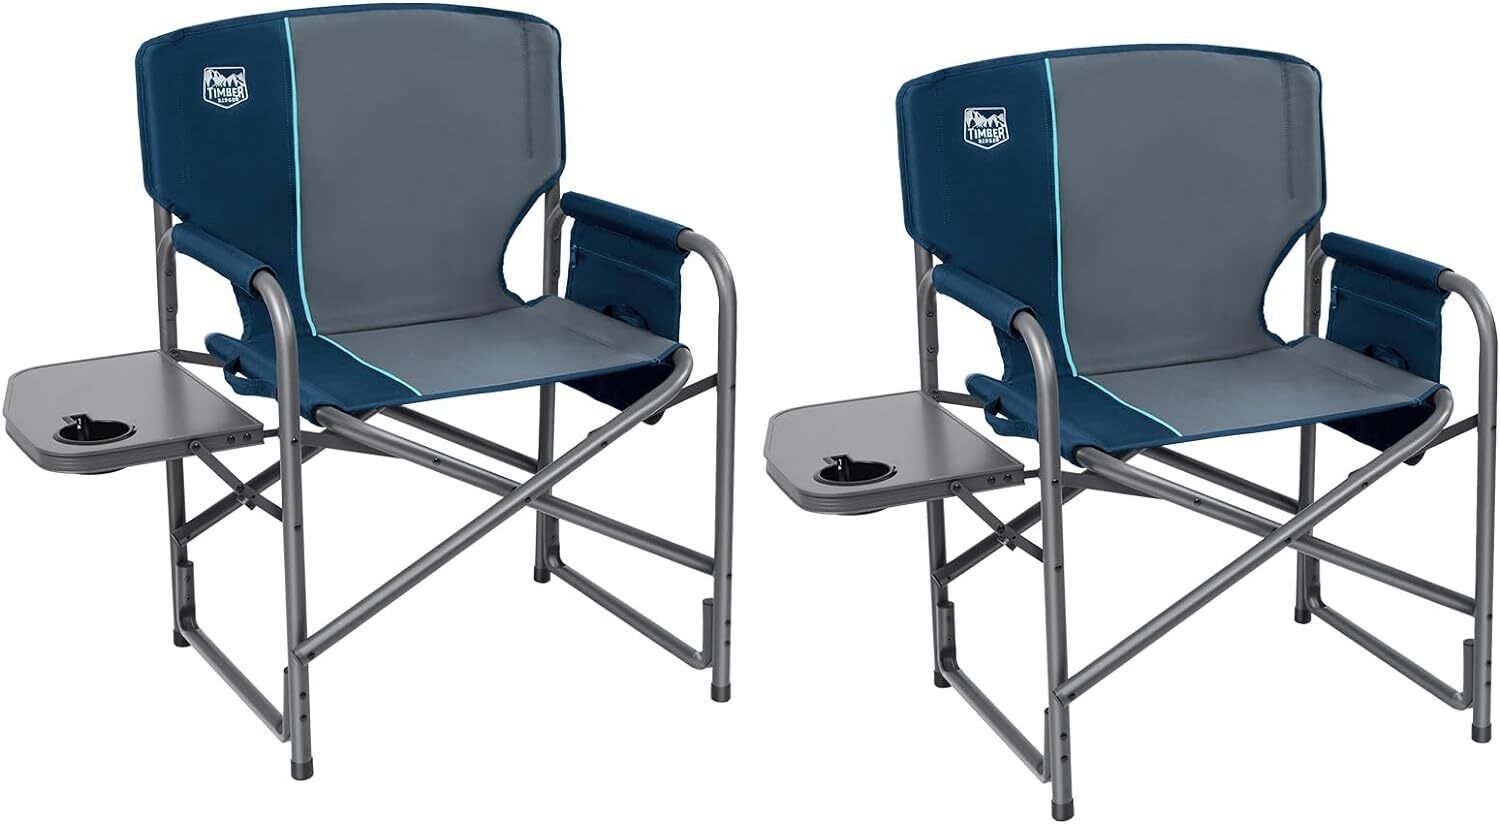 Lightweight Oversized Camping Chair, Lawn, Picnic, Support 400lbs Blue 2 Pack